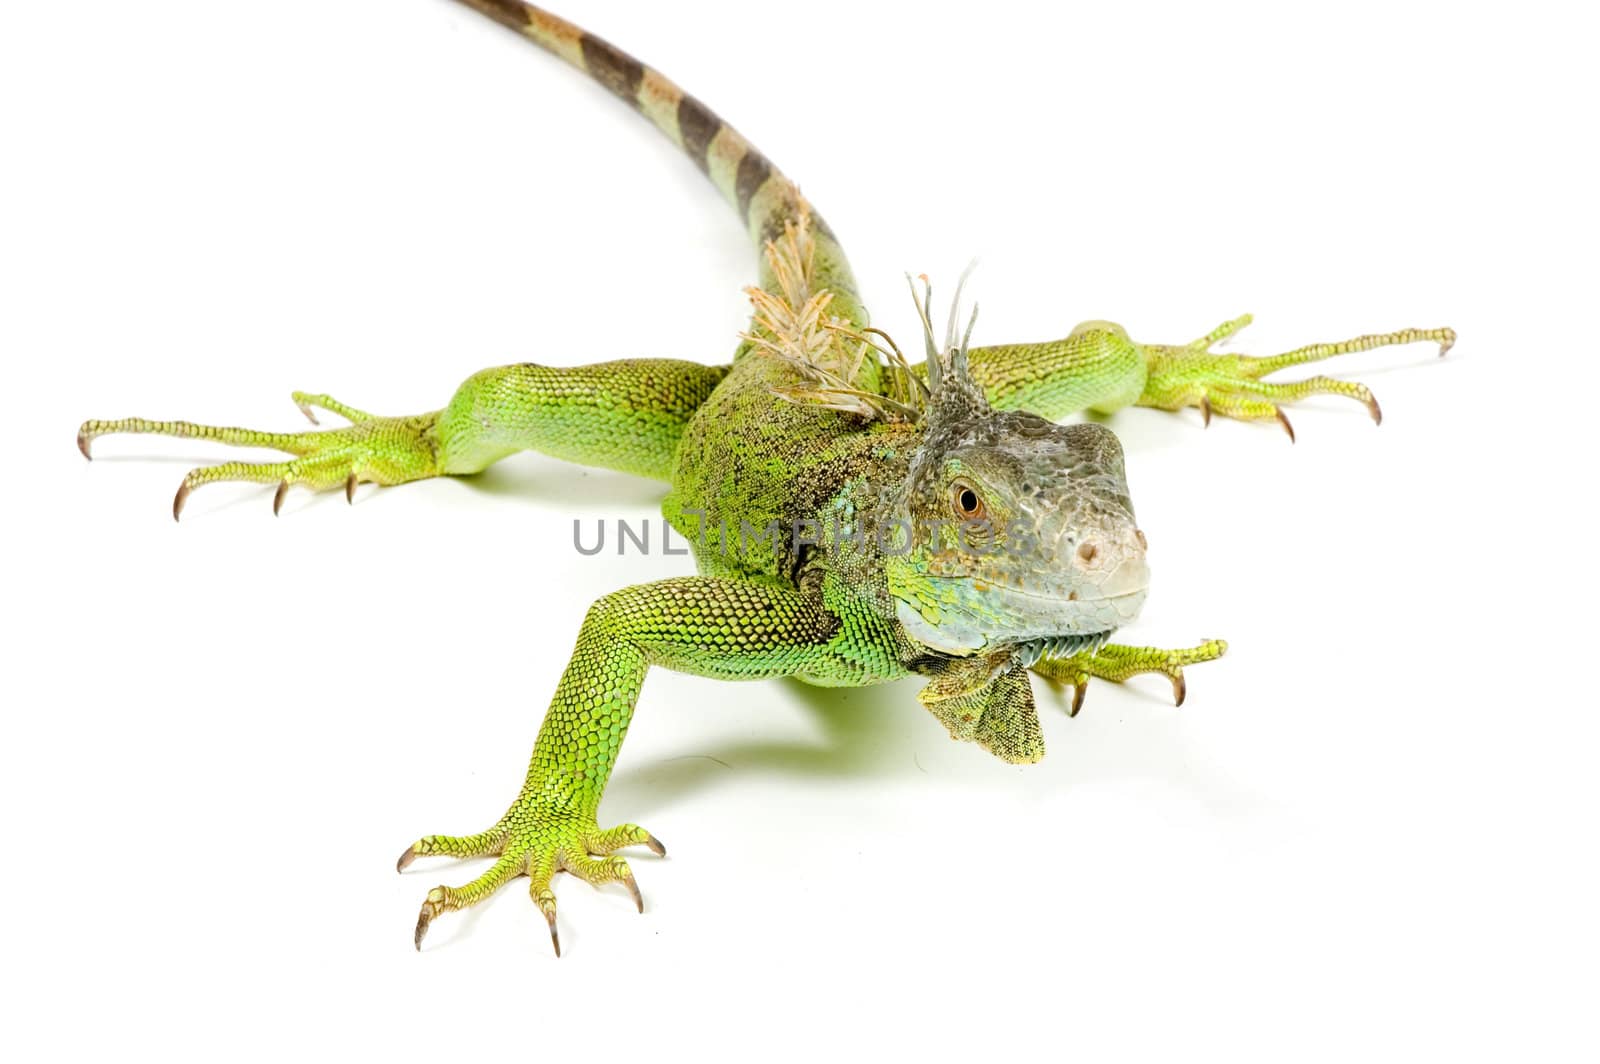 iguana isolated on a white background by ladyminnie